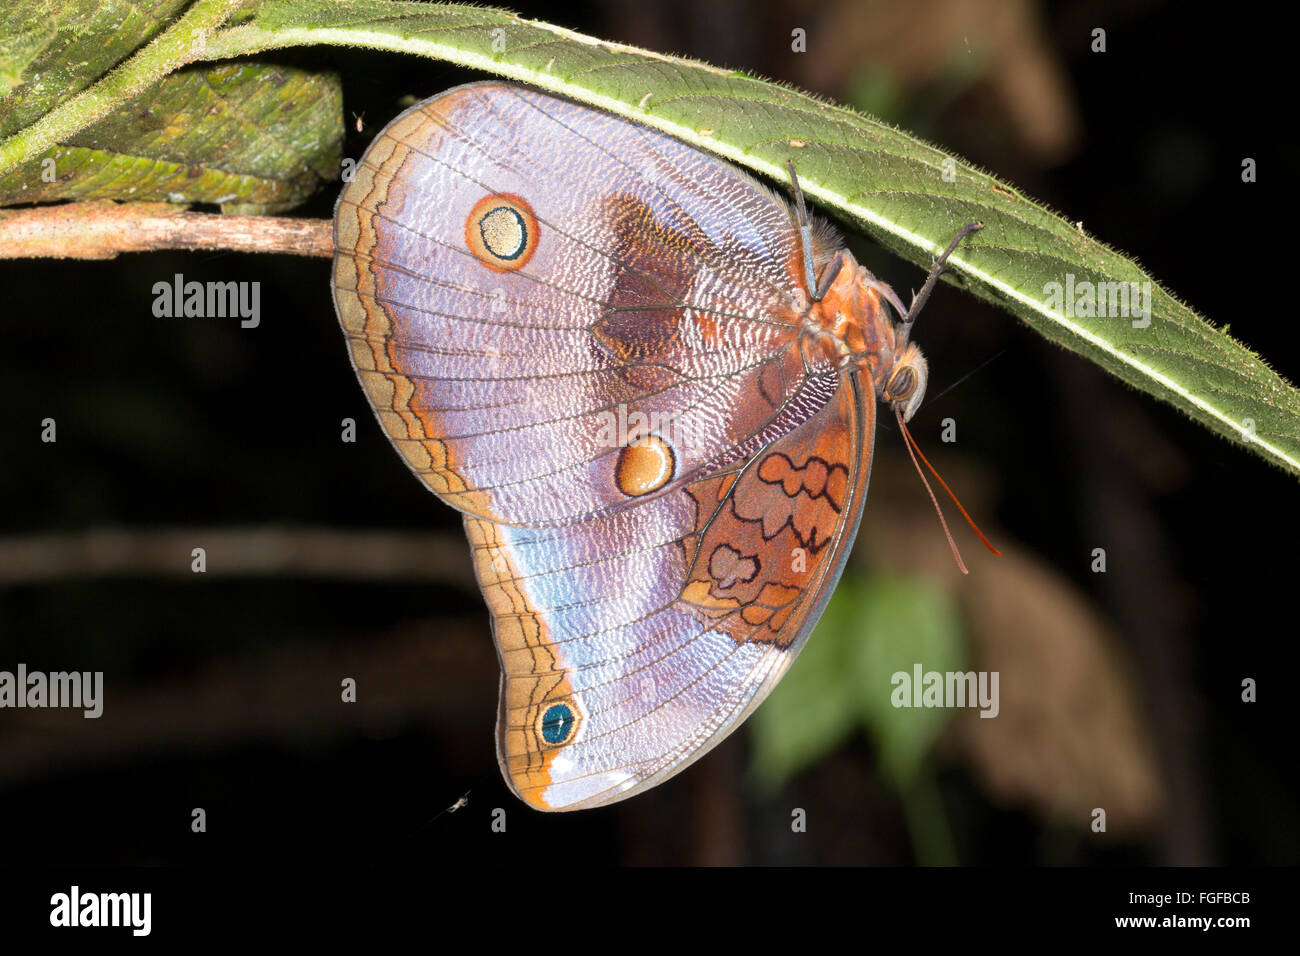 Butterfly, Catoblepia xanthocles, family Brassolidae roosting upside down in the rainforest understory at night in Ecuador Stock Photo